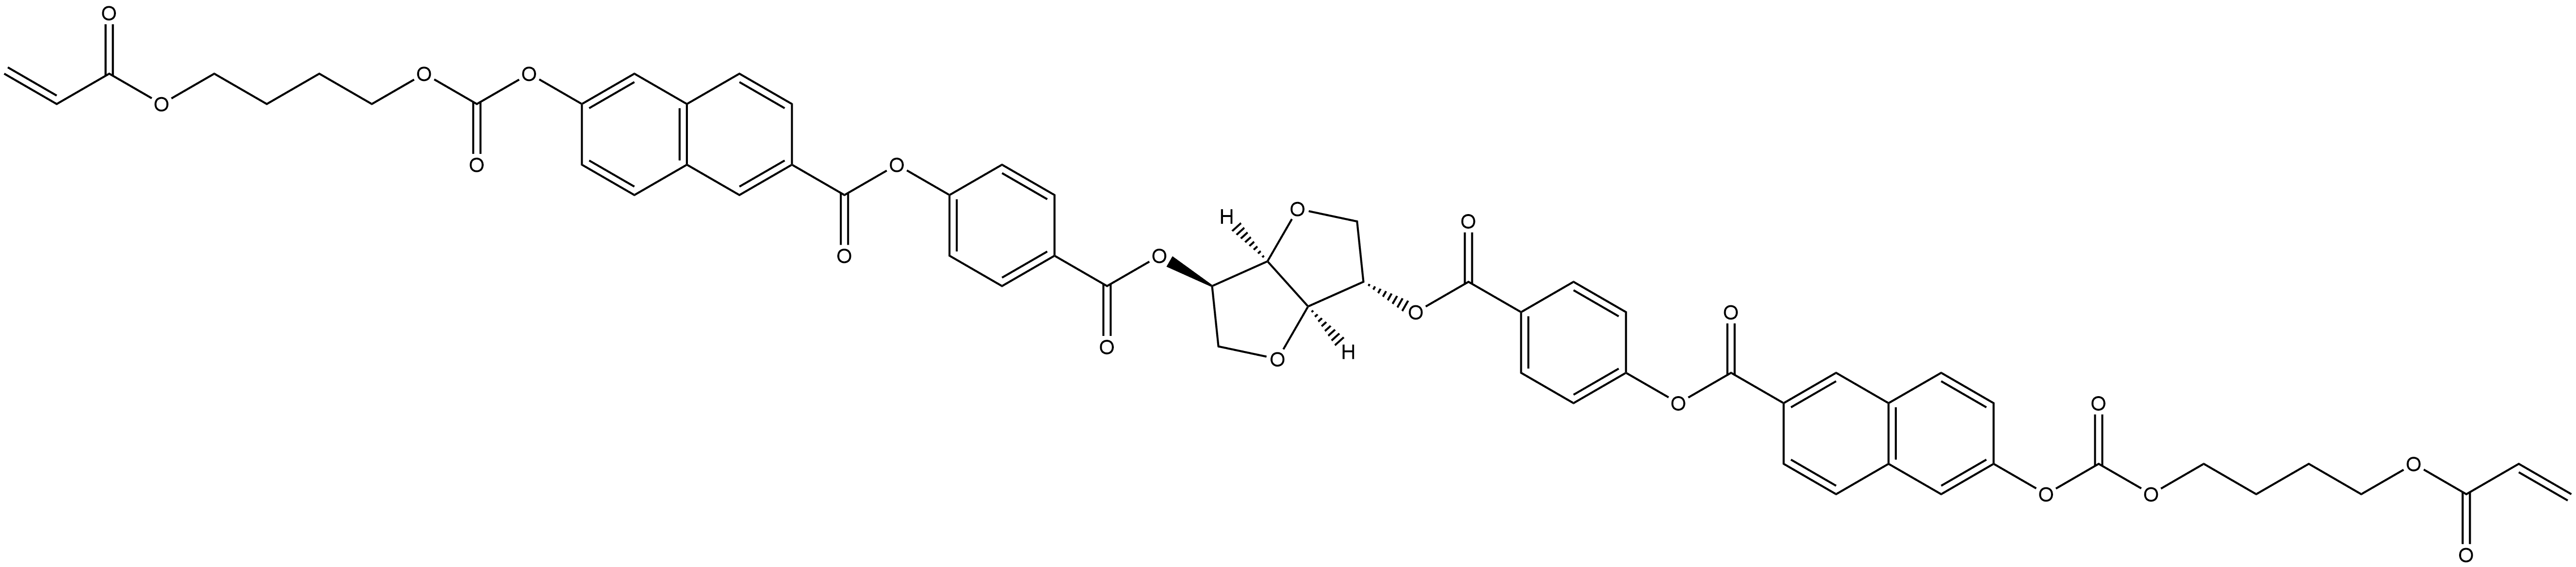 D-Glucitol, 1,4:3,6-dianhydro-, 2,5-bis[4-[[[6-[[[4-[(1-oxo-2-propen-1-yl)oxy]butoxy]carbonyl]oxy]-2-naphthalenyl]carbonyl]oxy]benzoate] Structure